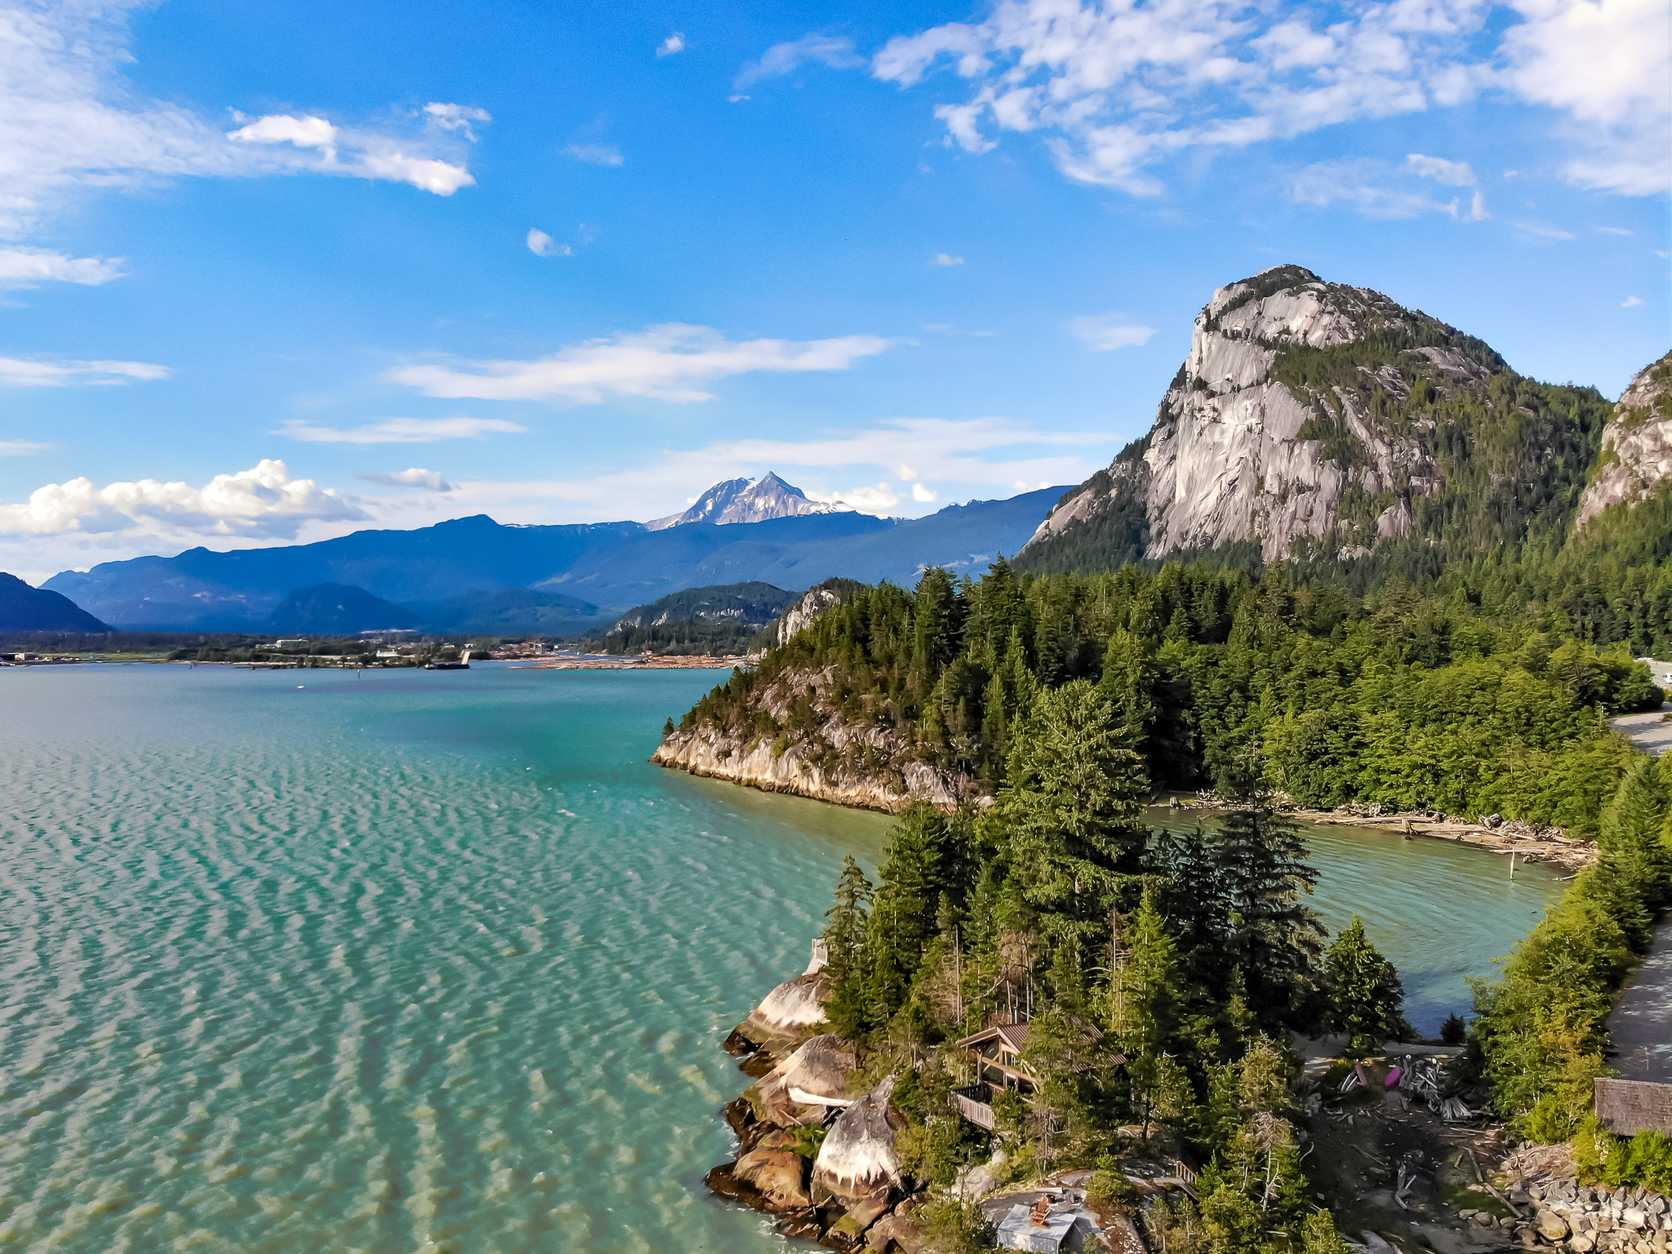 "A Beautiful Summer Day at the Squamish
Oceanfront"